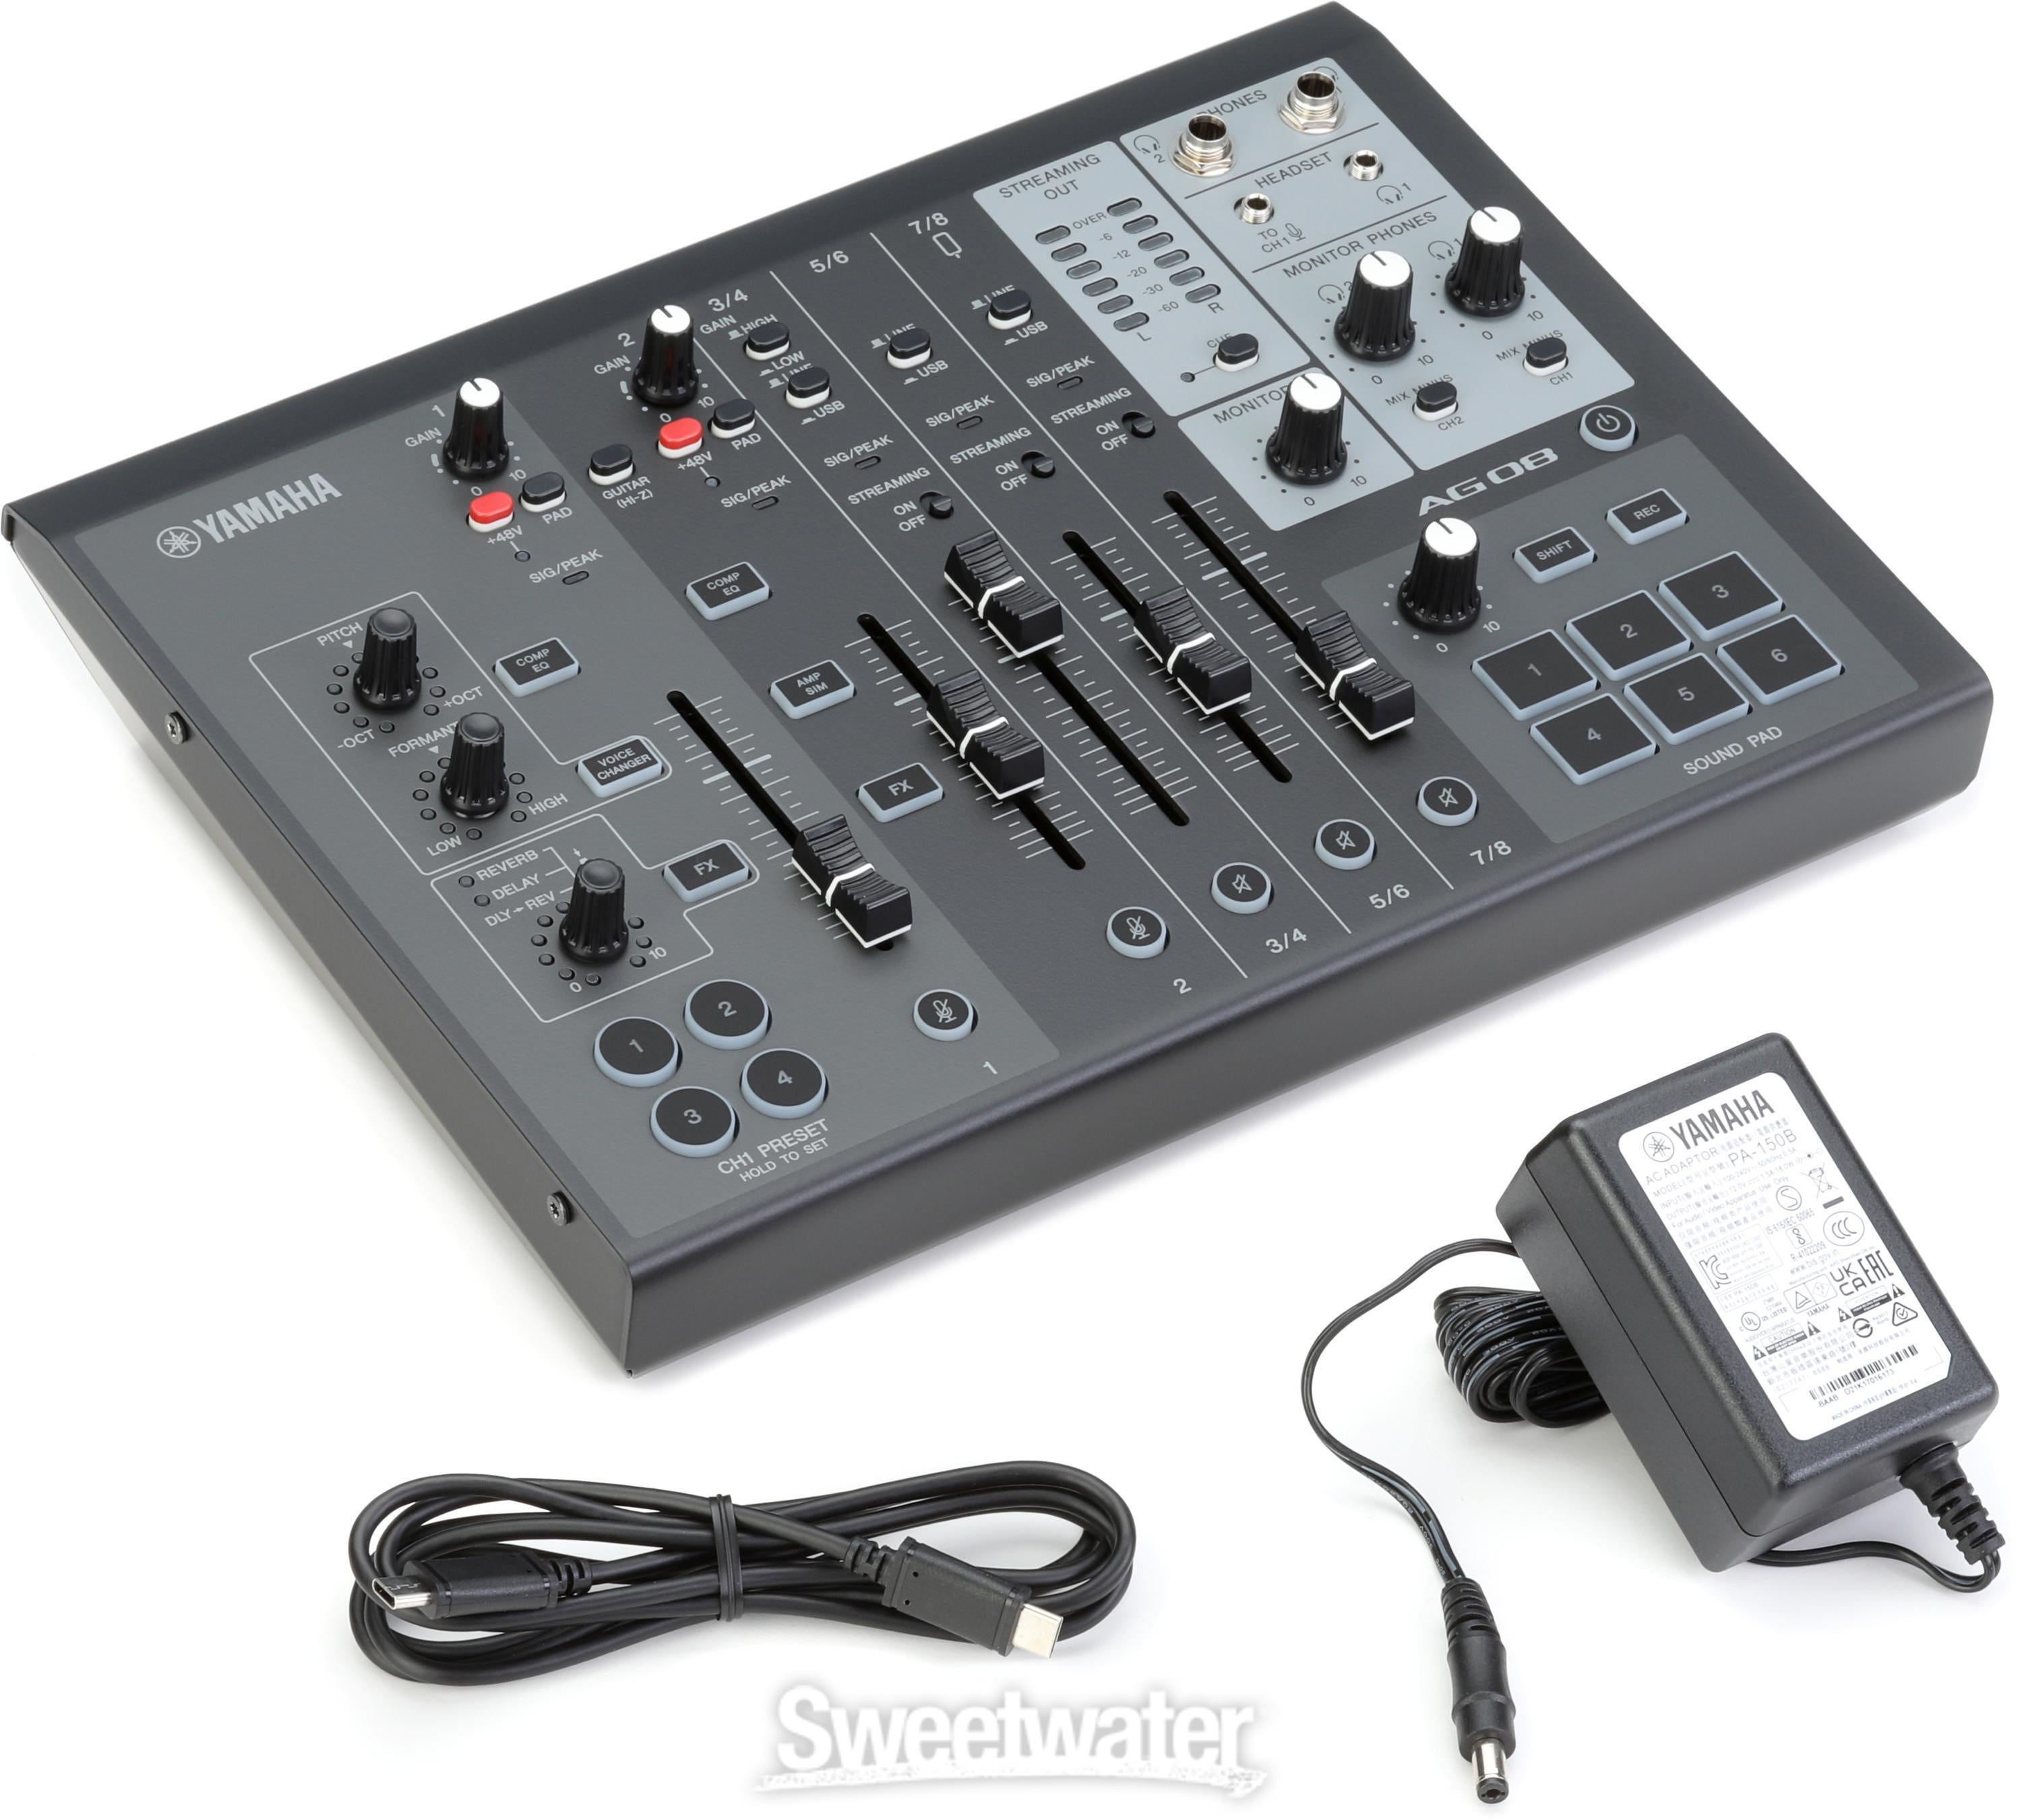 Yamaha AG08 8-channel Mixer/USB Interface for Mac/PC - Black | Sweetwater